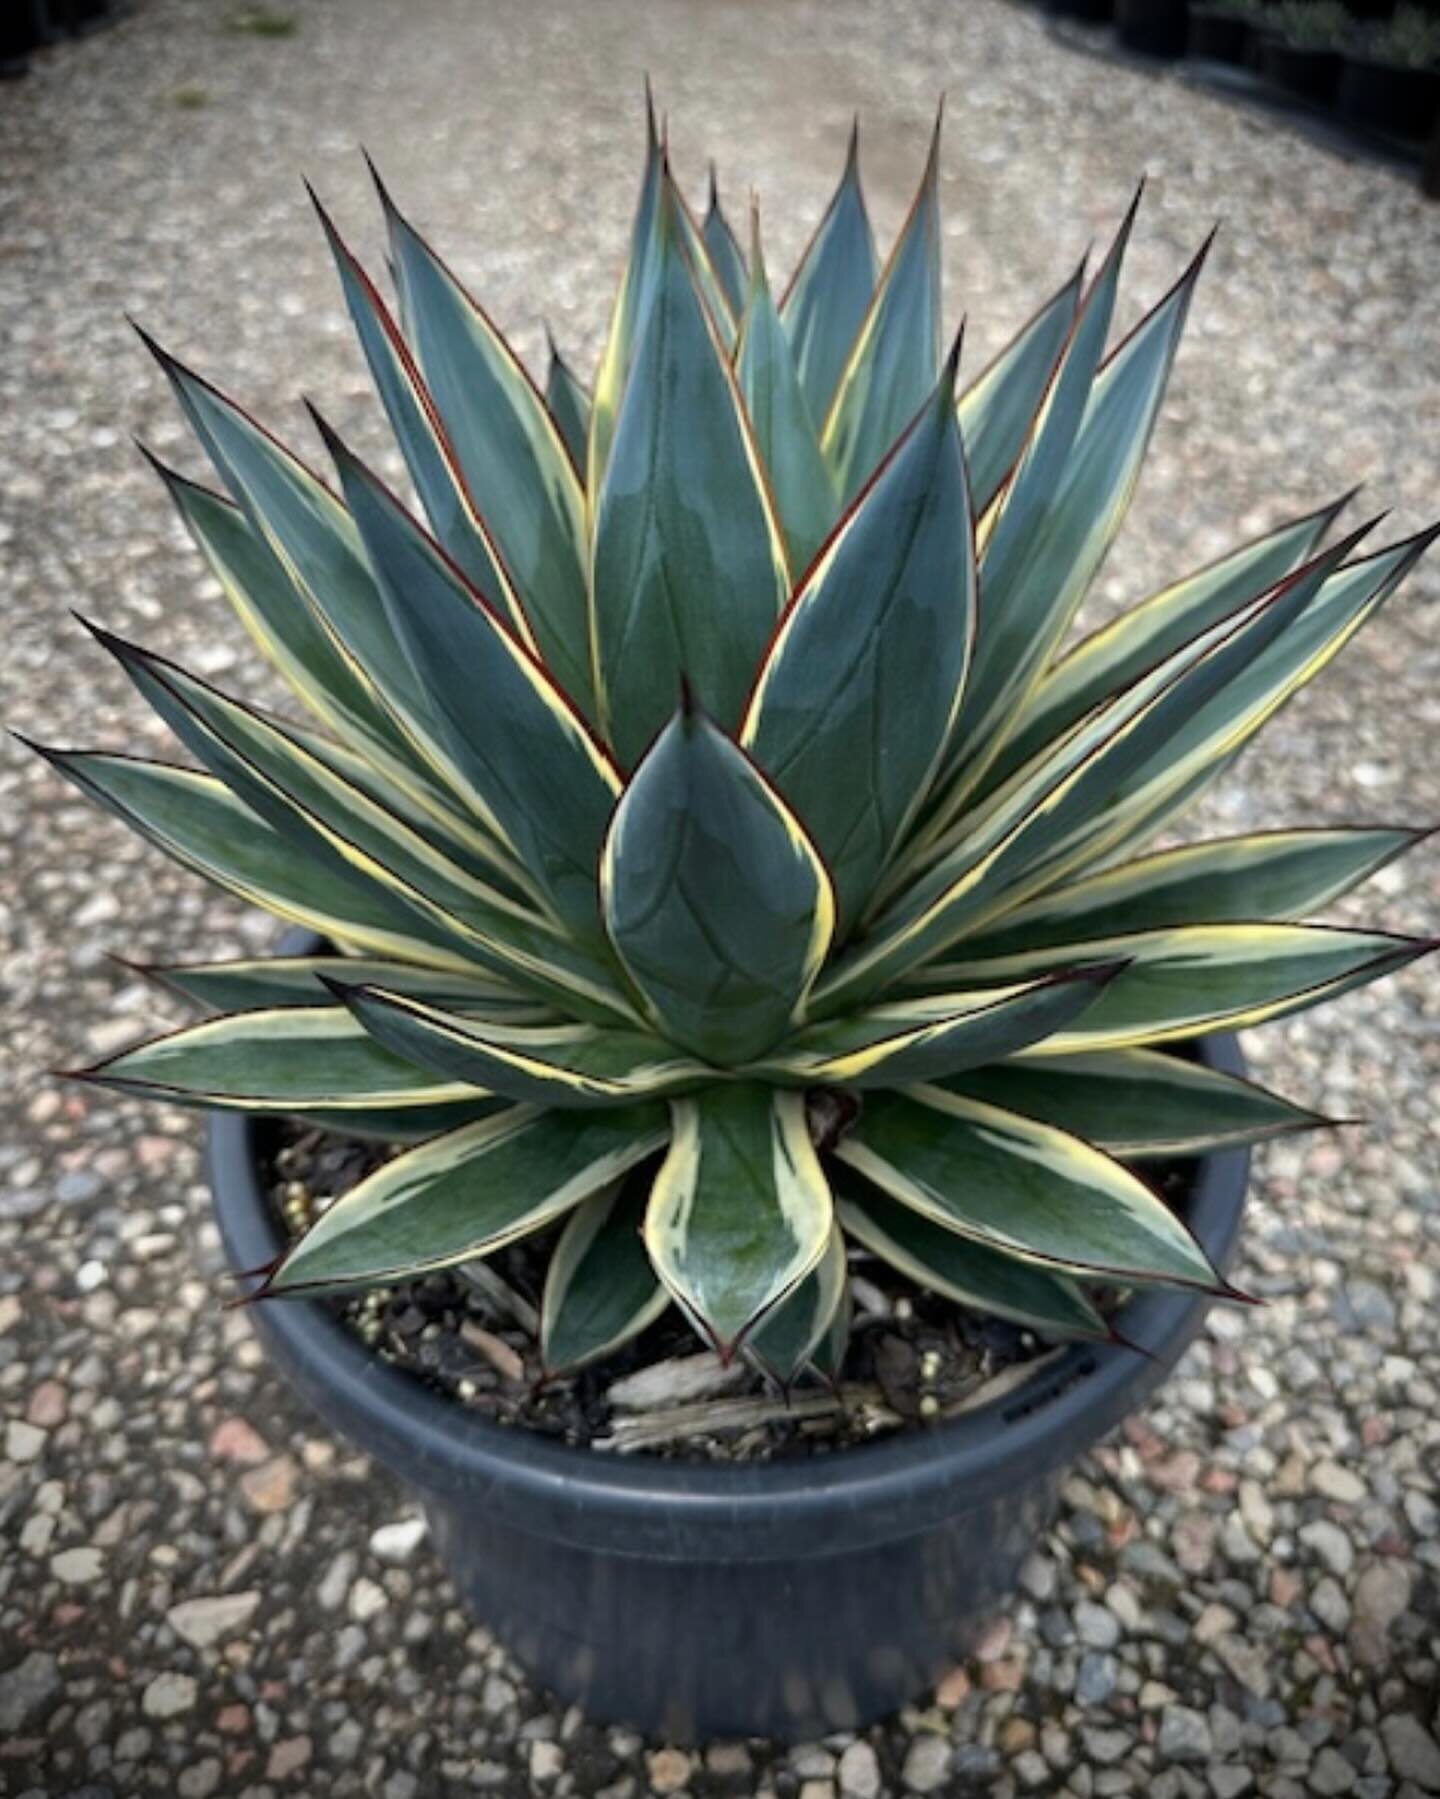 &lsquo;Snow Glow&rsquo; 300mm is one of the most exceptionally attractive variegated Agaves in the market, with a nearly perfect ball-shaped rosette of long, lance-like leaves. A strikingly beautiful succulent that adds an elegant touch to any landsc